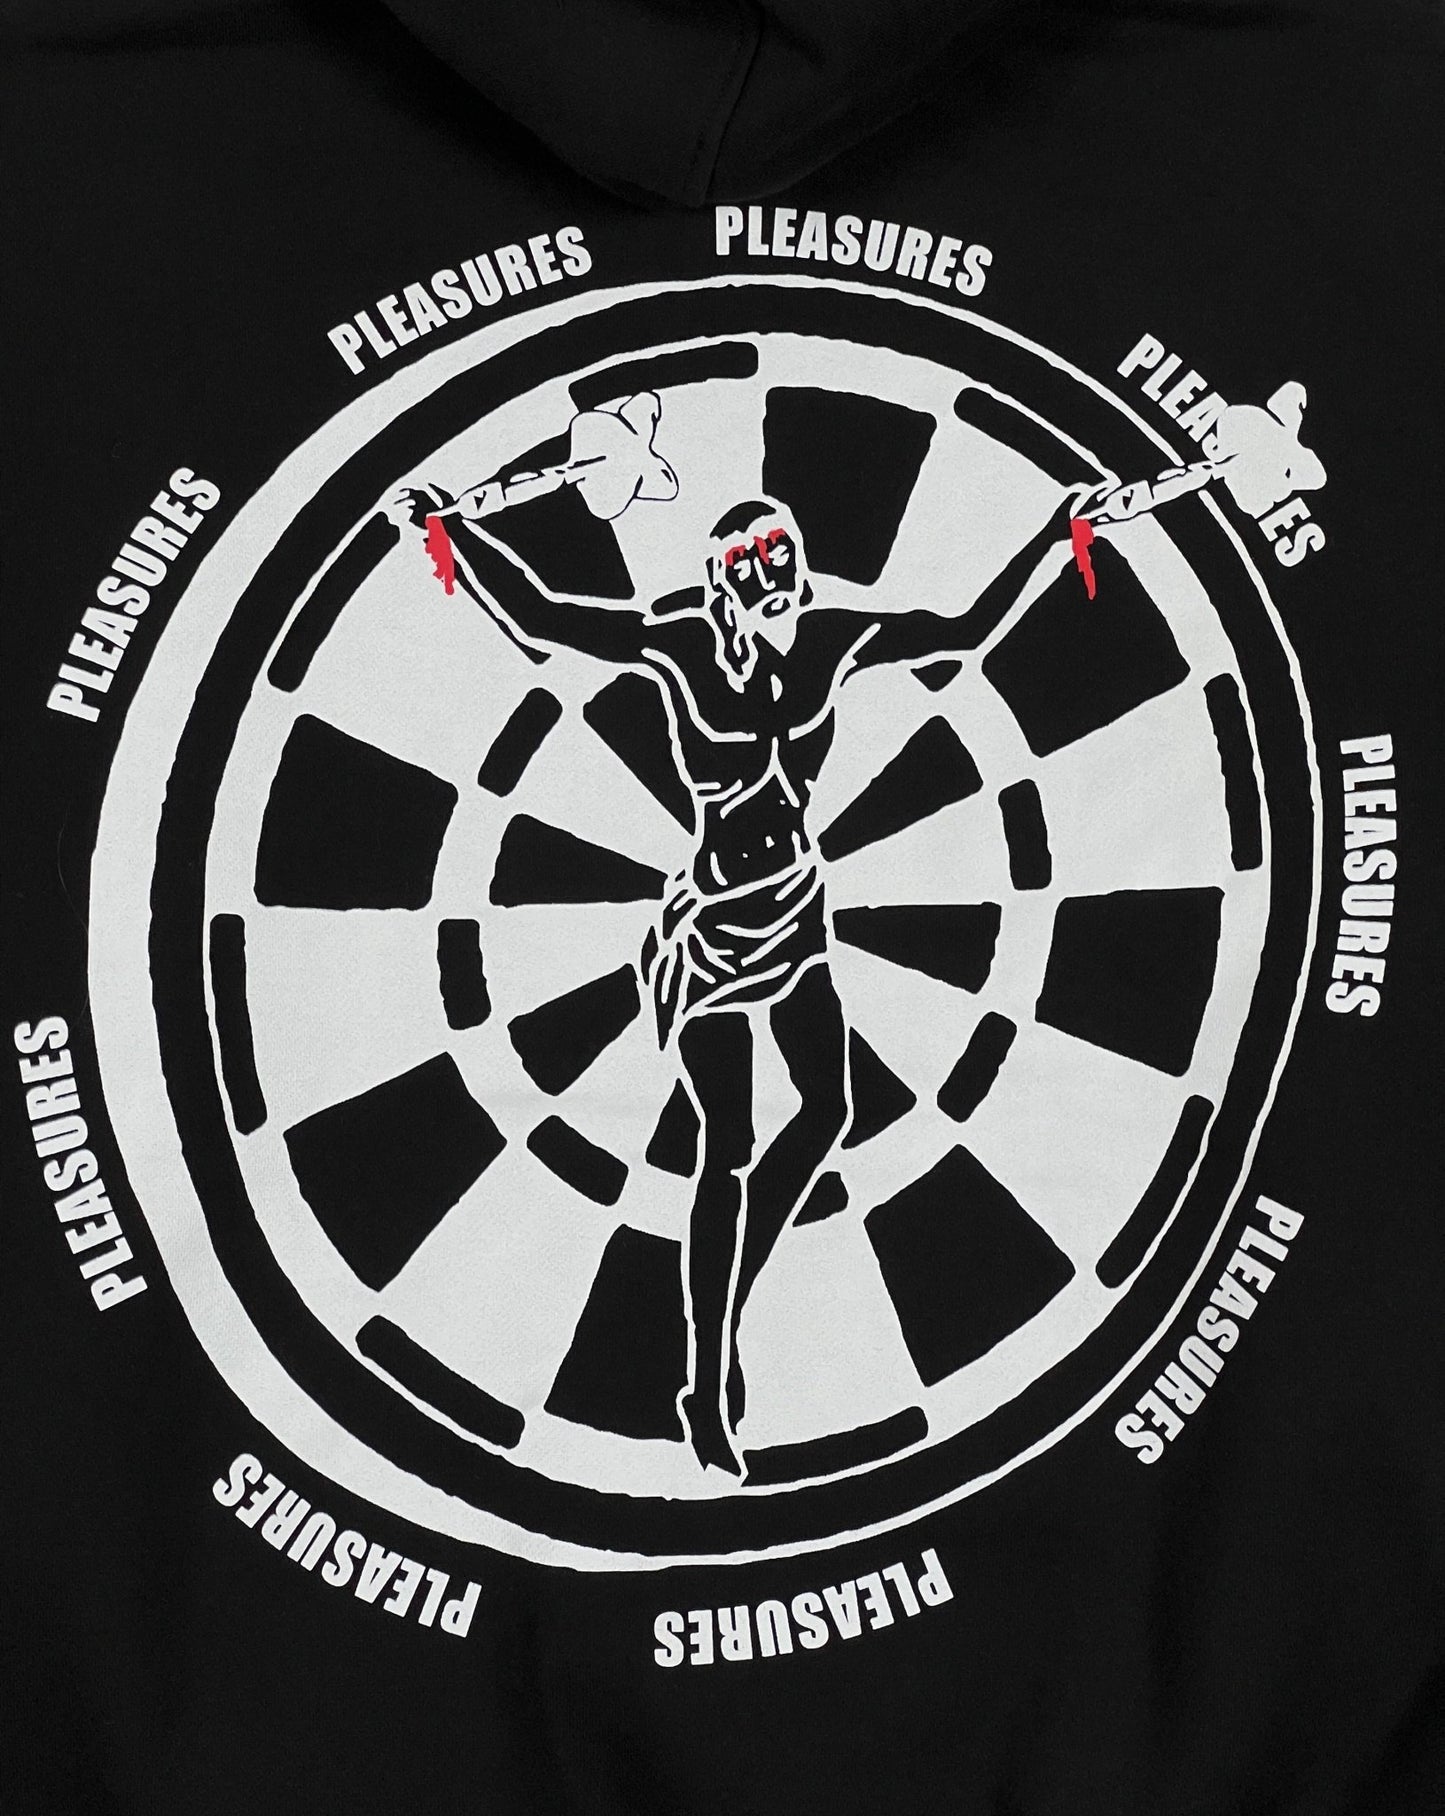 A PLEASURES DARTBOARD HOODIE BLACK with an image of a man holding a dart in front of a dartboard.